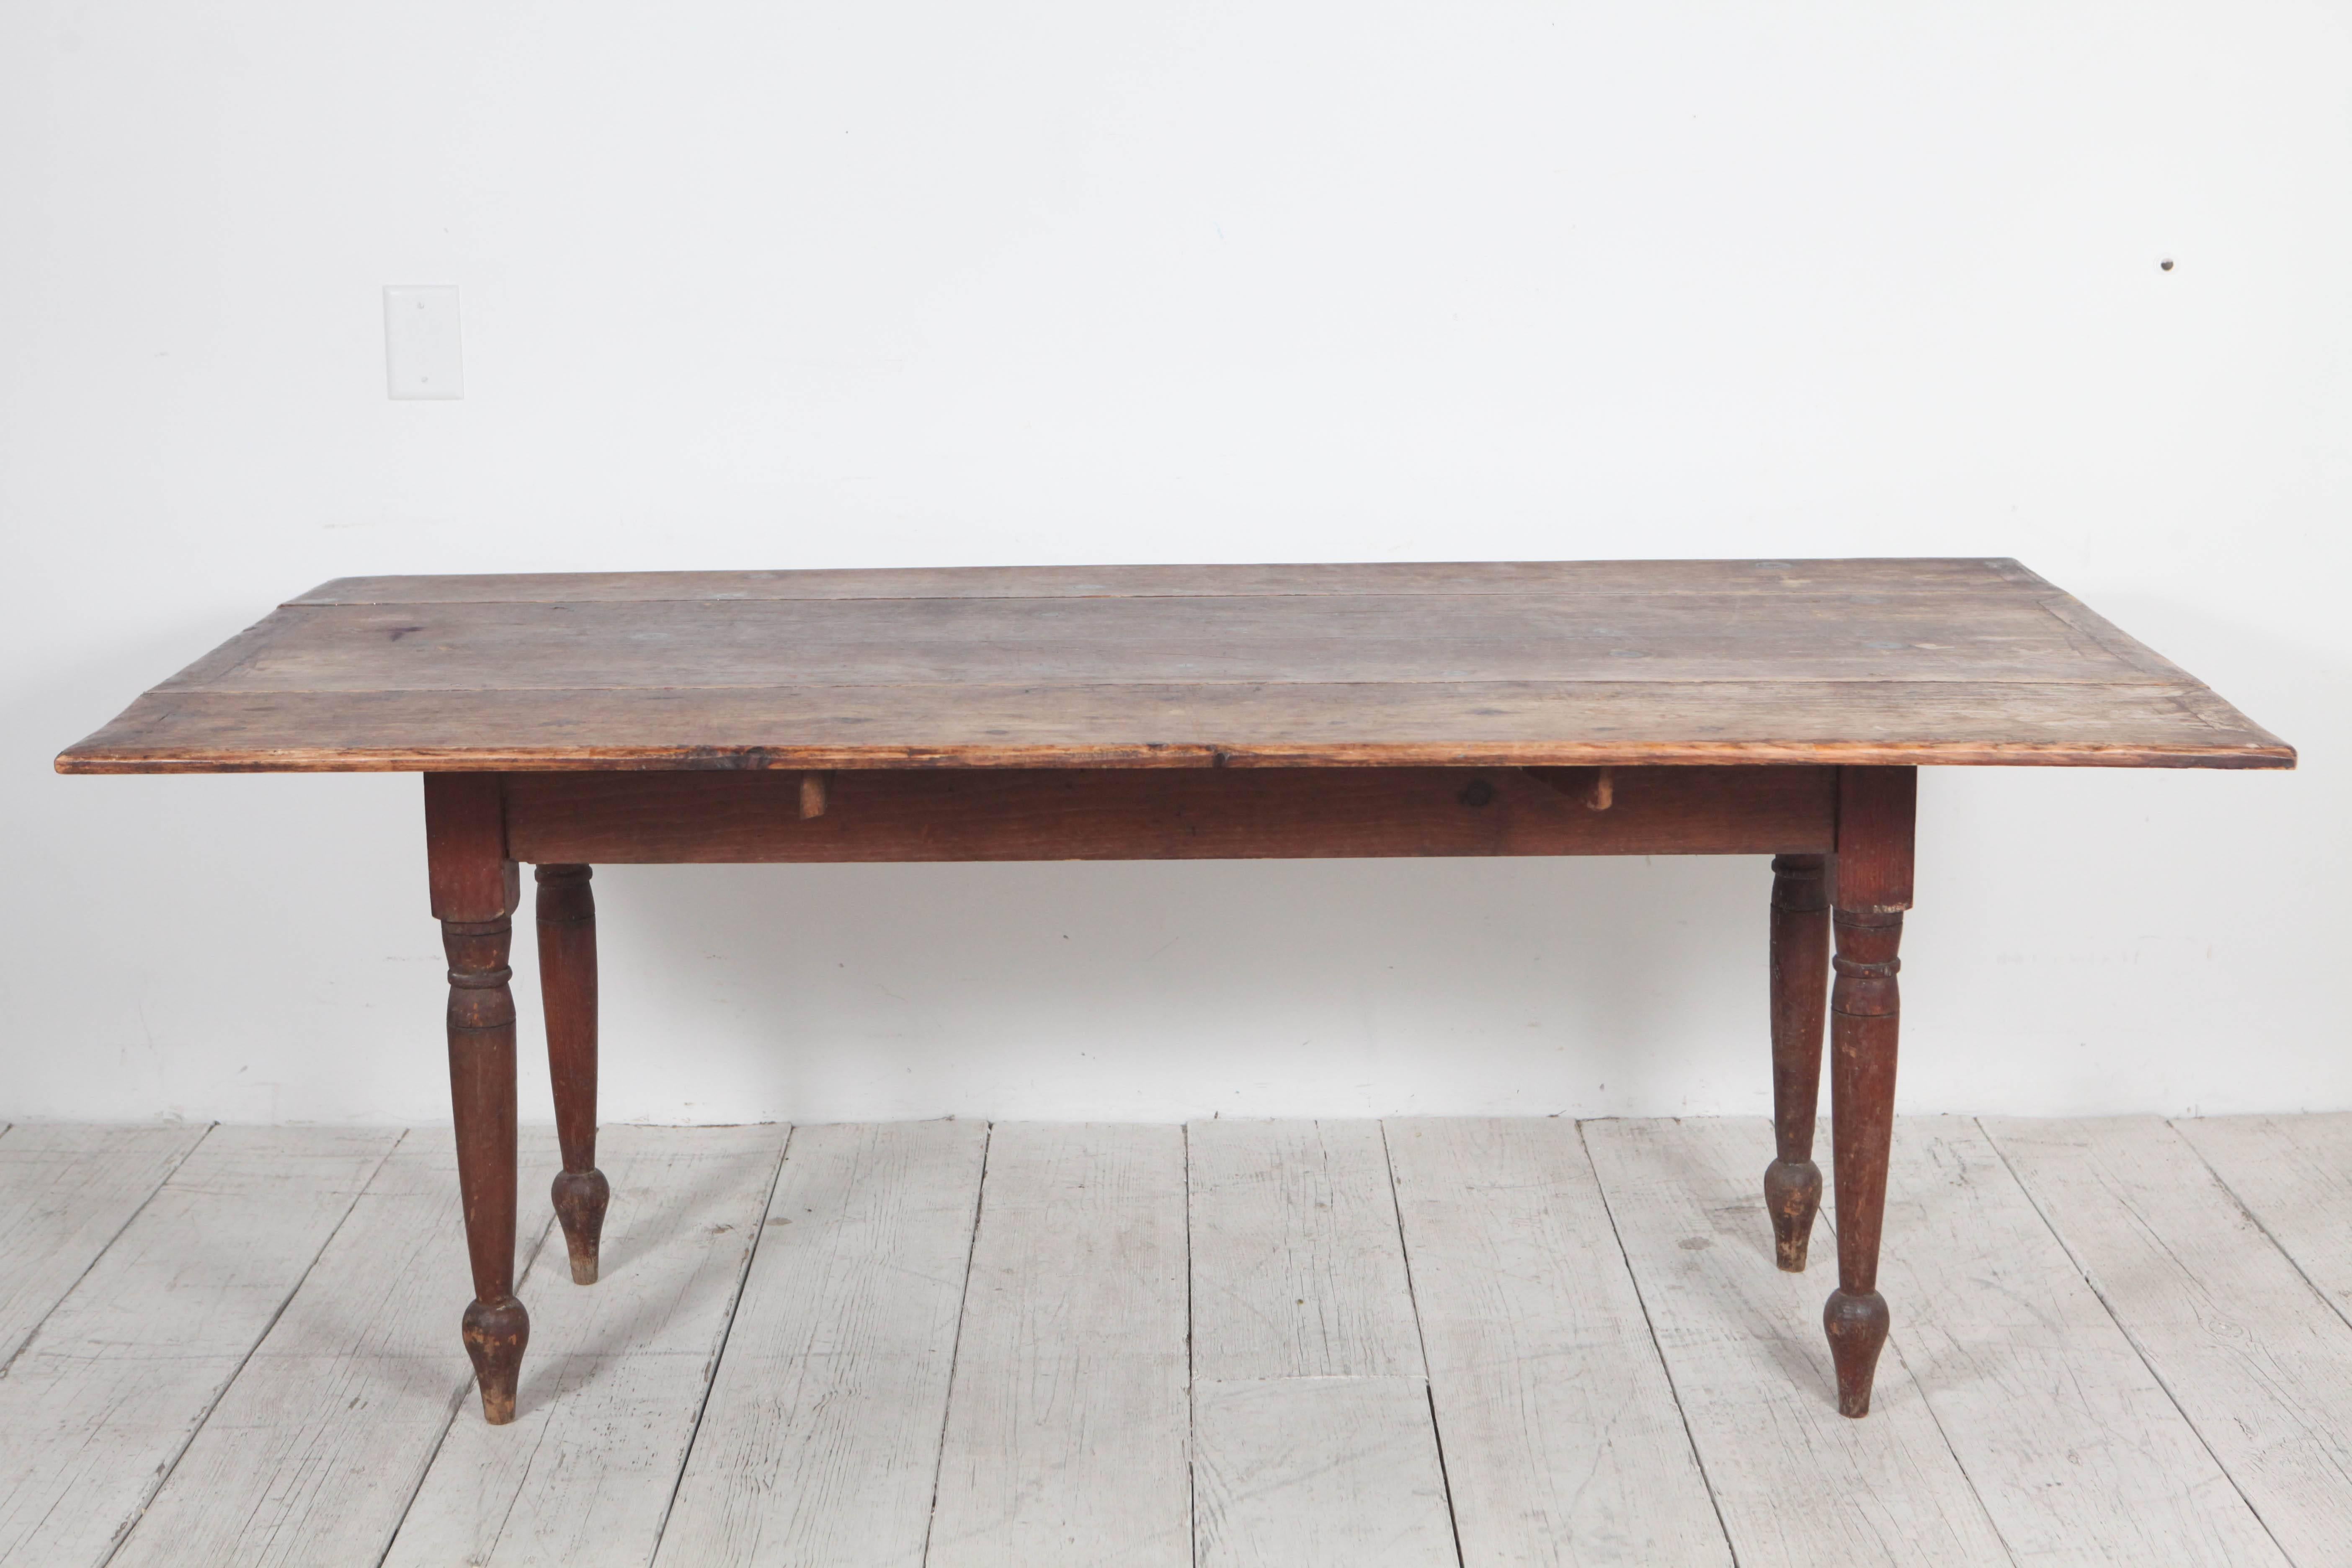 Rustic Drop-Leaf Wooden Table with Turned Legs 4